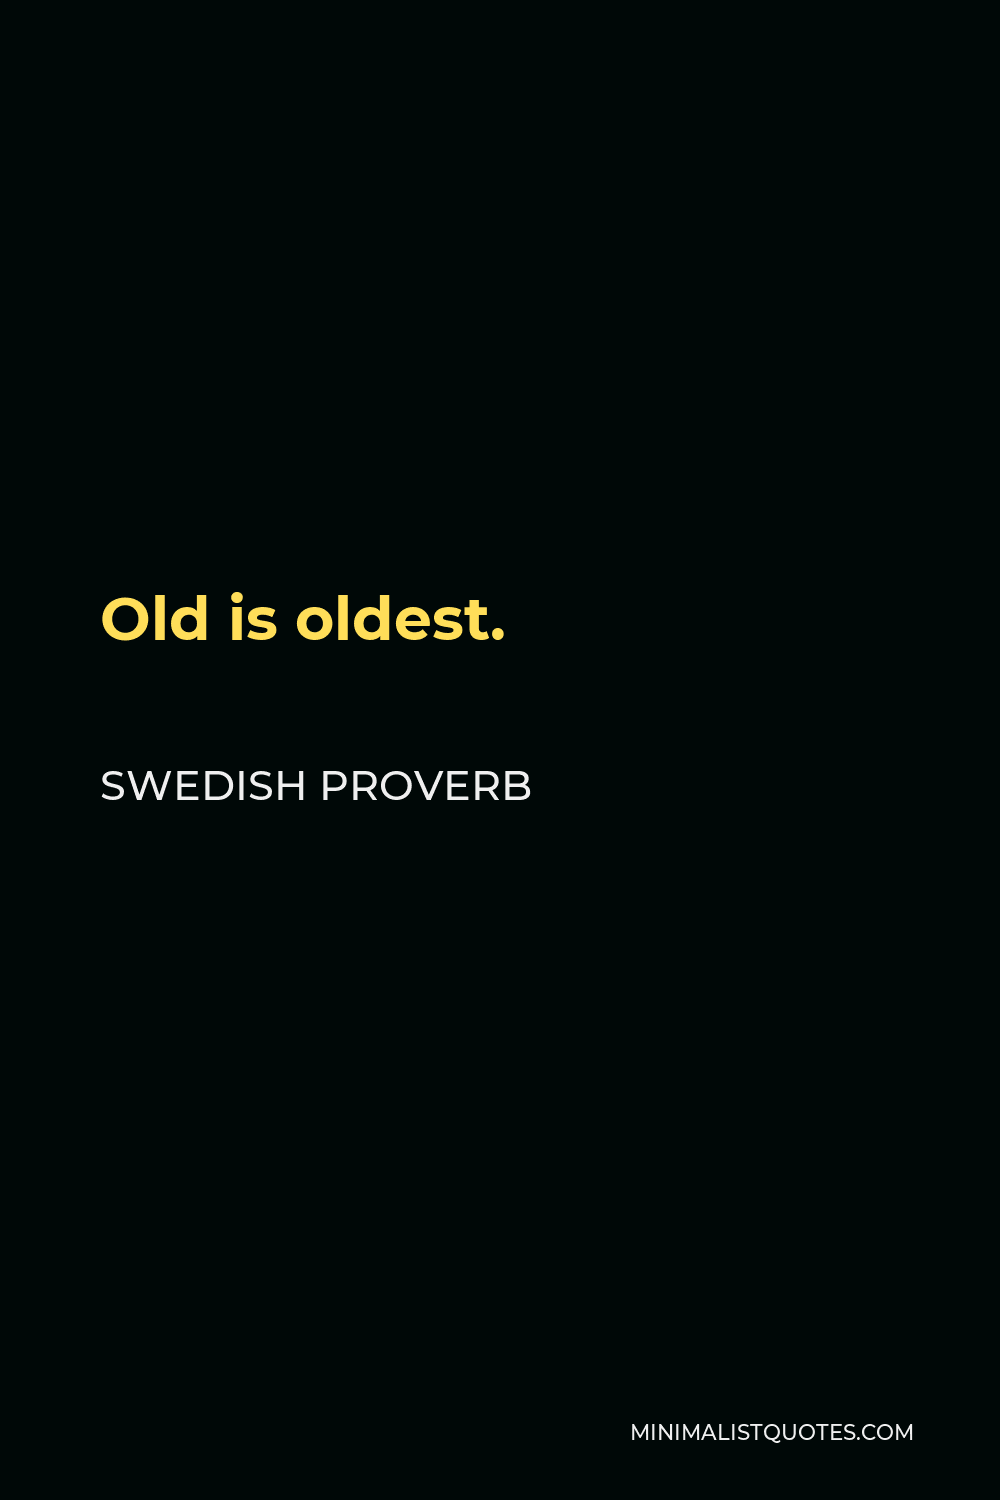 Swedish Proverb Quote - Old is oldest.